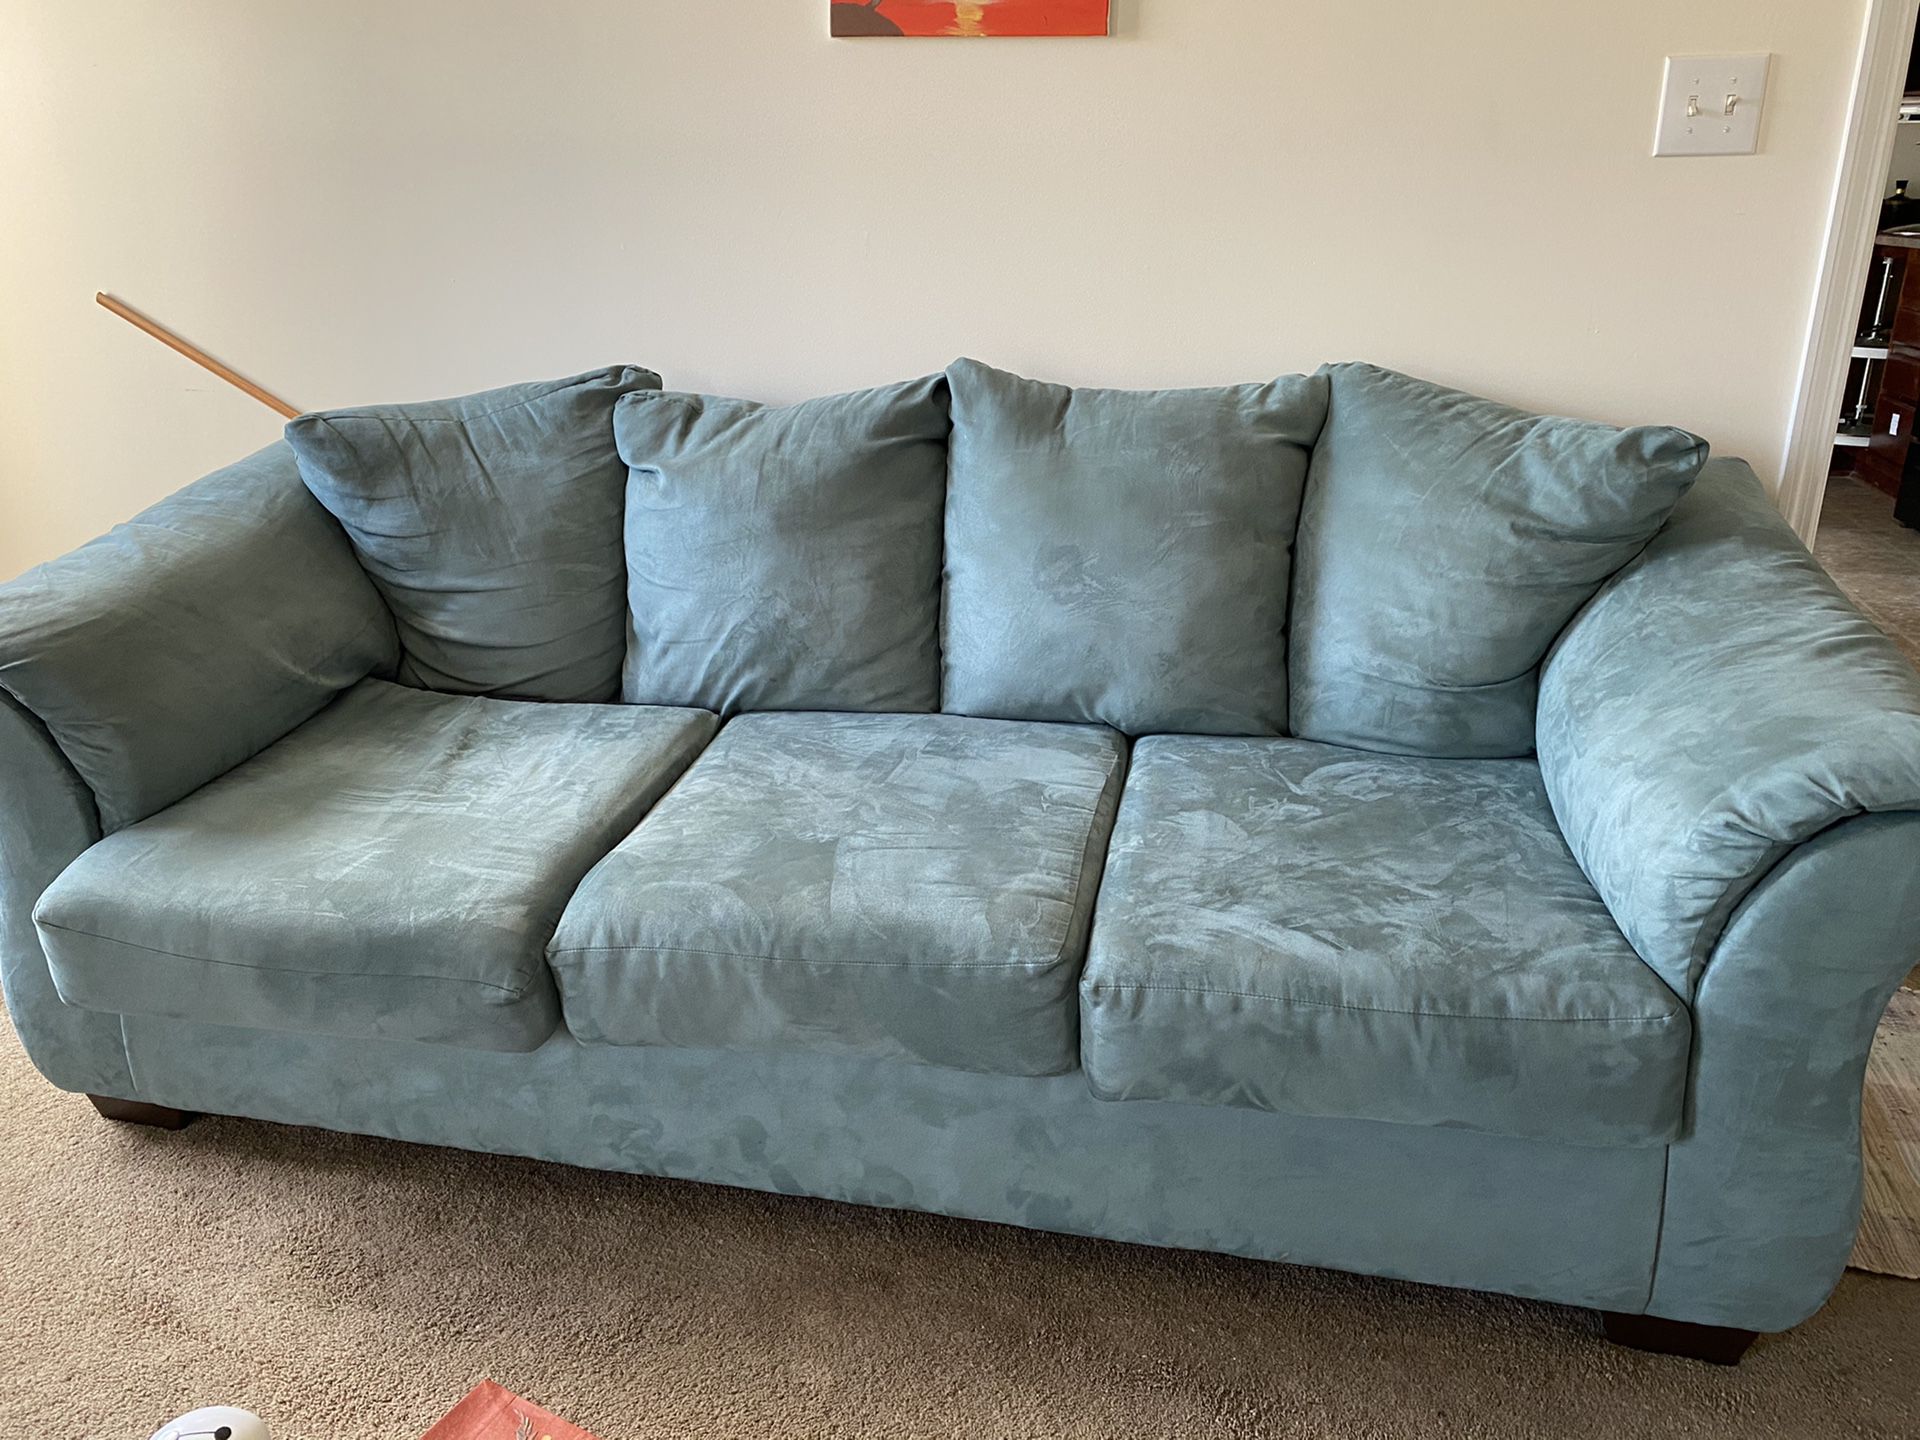 Couch (Really Really soft and comfortable)